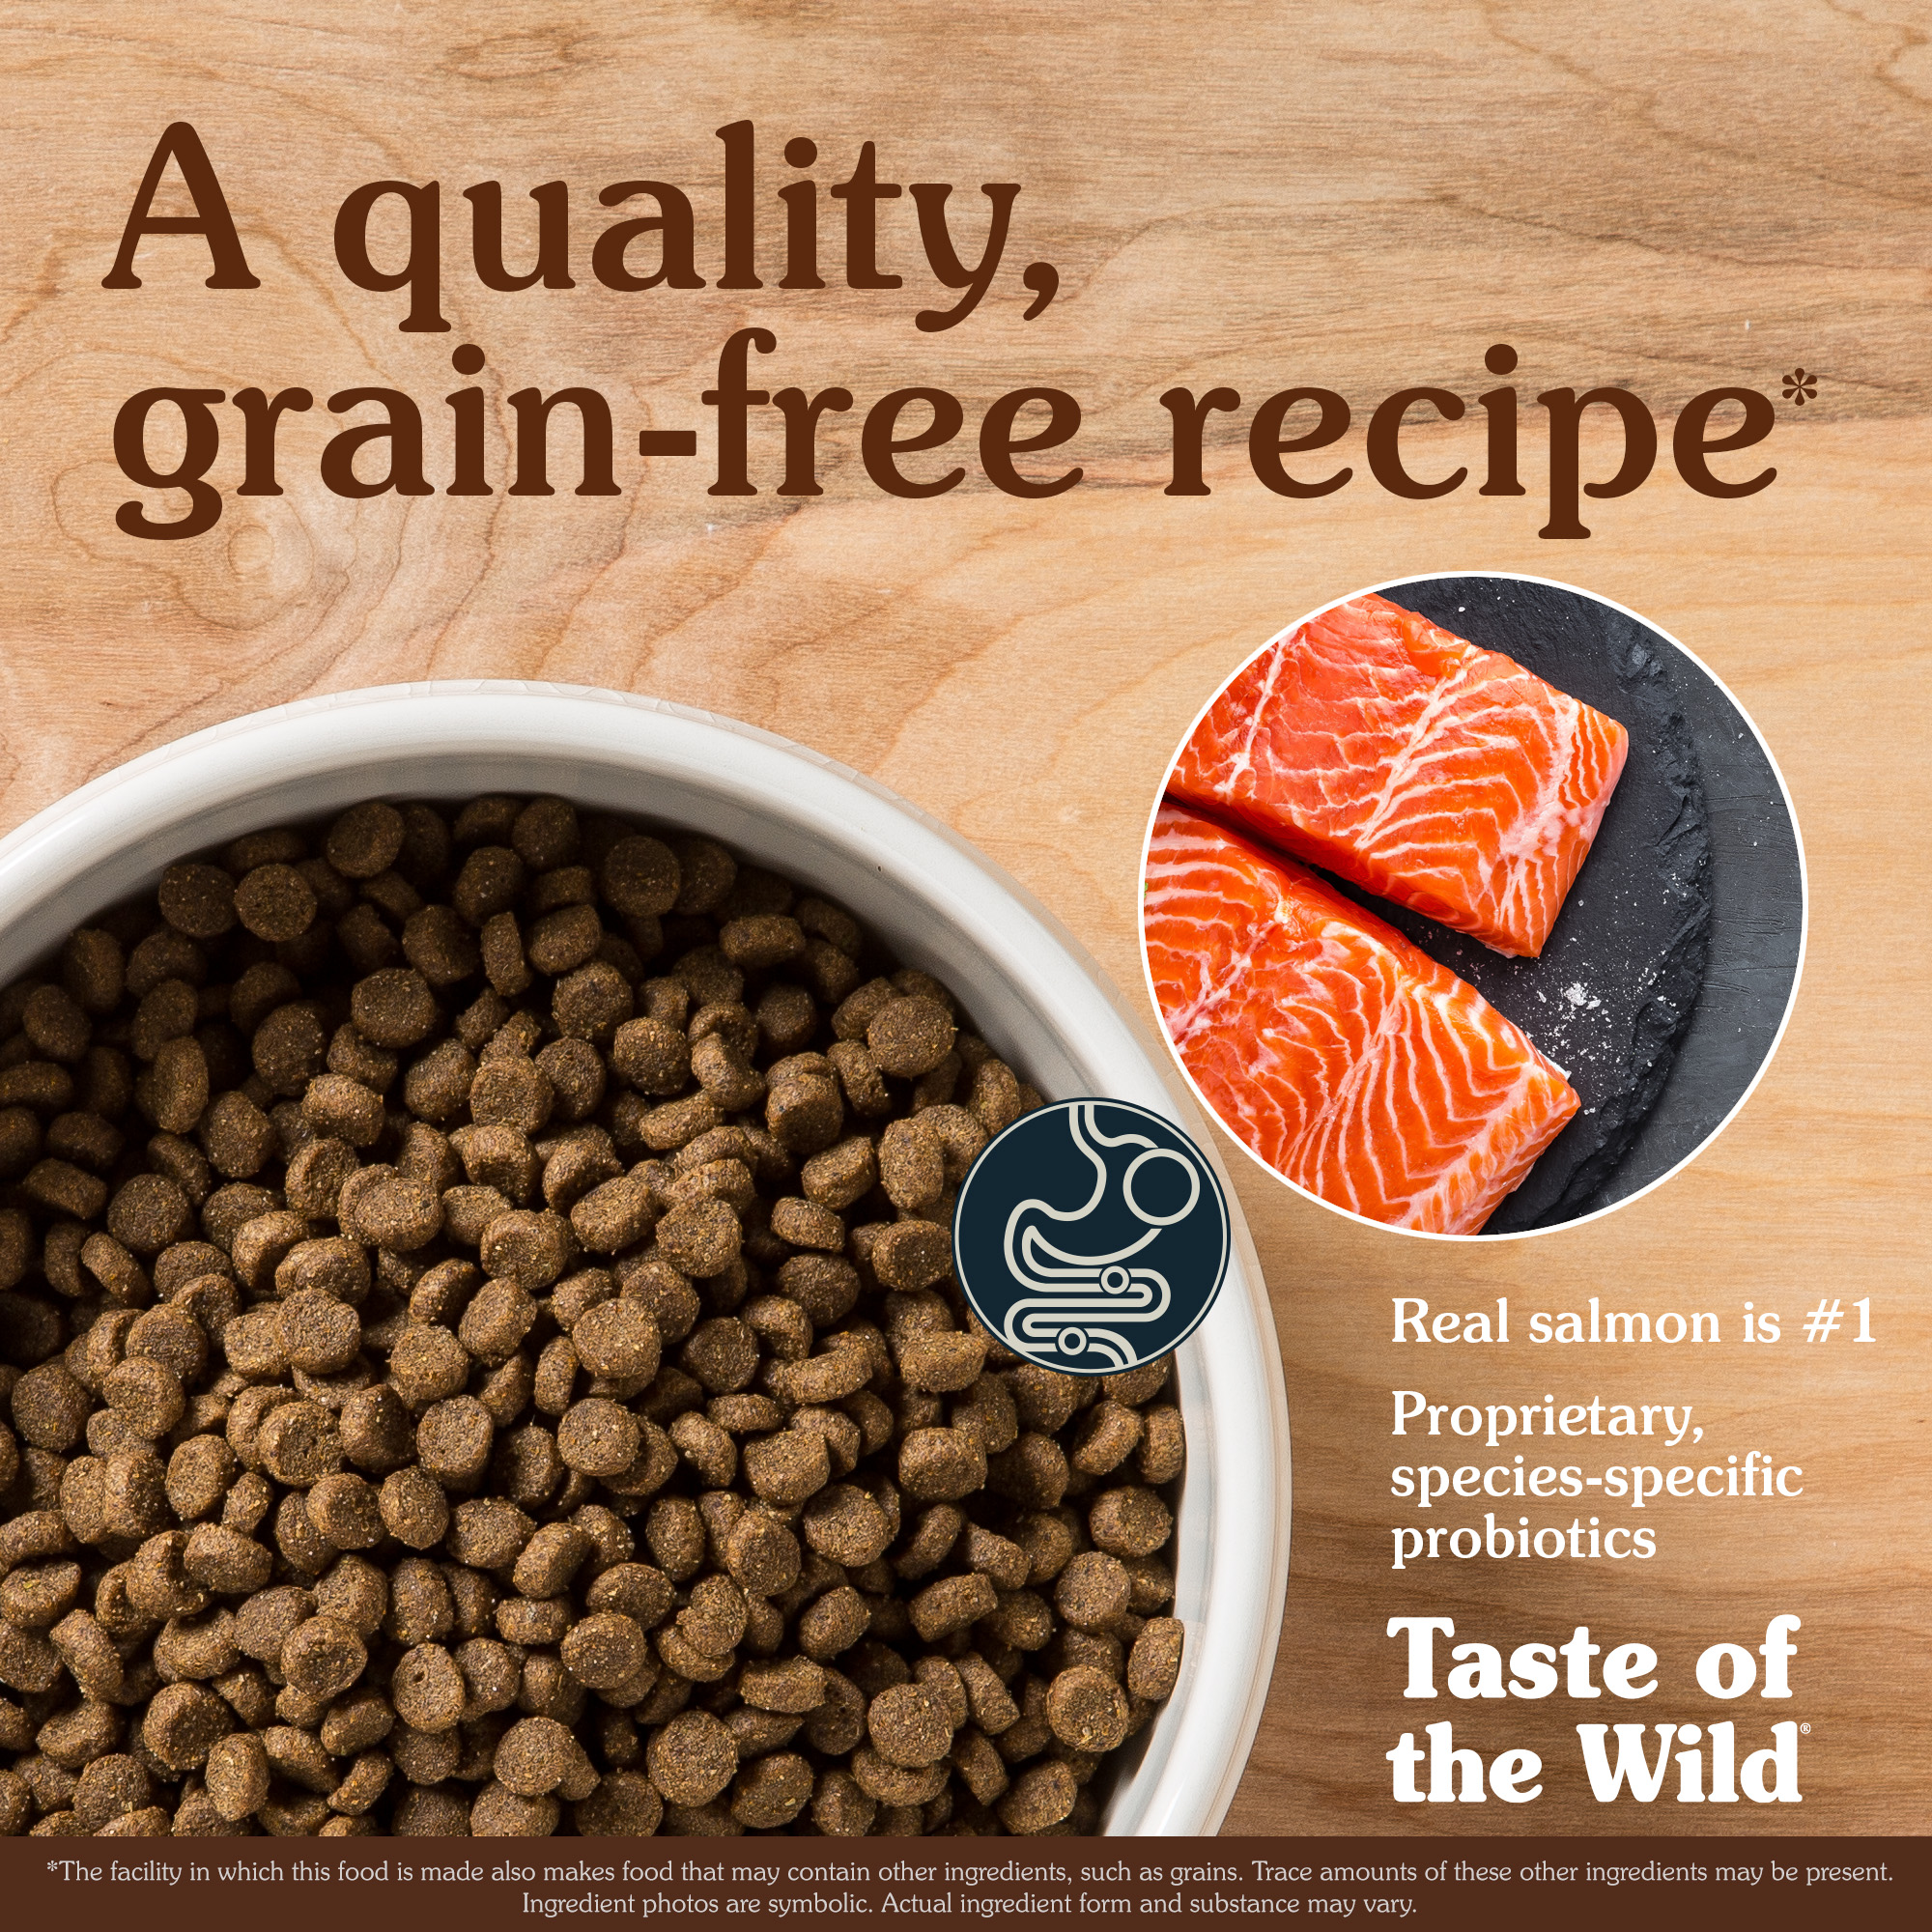 A white ceramic bowl full of Pacific Stream Puppy Recipe with Smoke-Flavored Salmon kibble with a circular overlay image containing two cuts of real salmon meat.